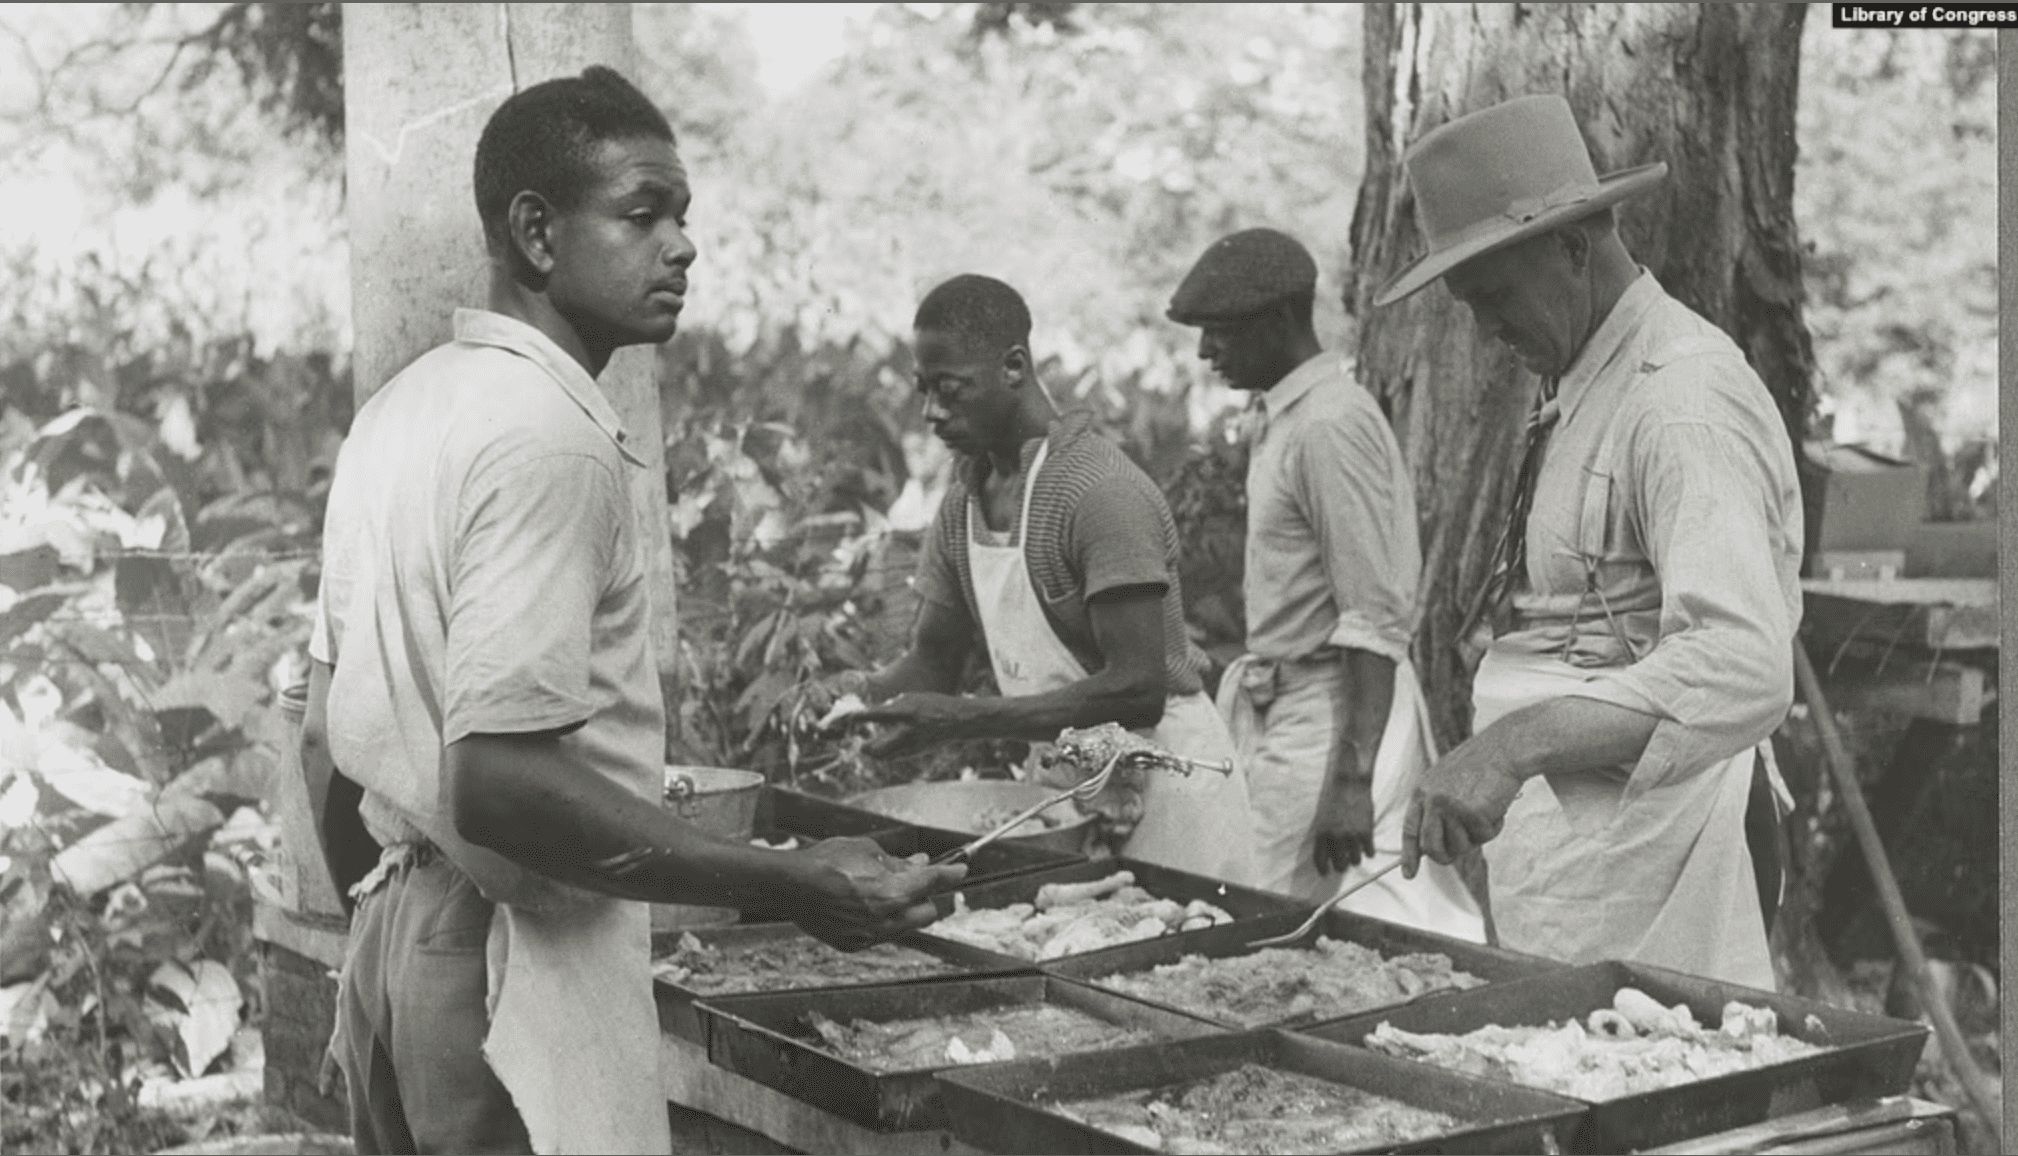 Cooking fried supper for a benefit picnic supper on the grounds of St. Thomas' Church, near Bardstown, Kentucky. Photo by Marion Post Wolcott, August 7, 1940. Library of Congress Prints and Photographs Division, FSA/OWI Black & White Negatives Collection, LC-USF33-030967-M4.